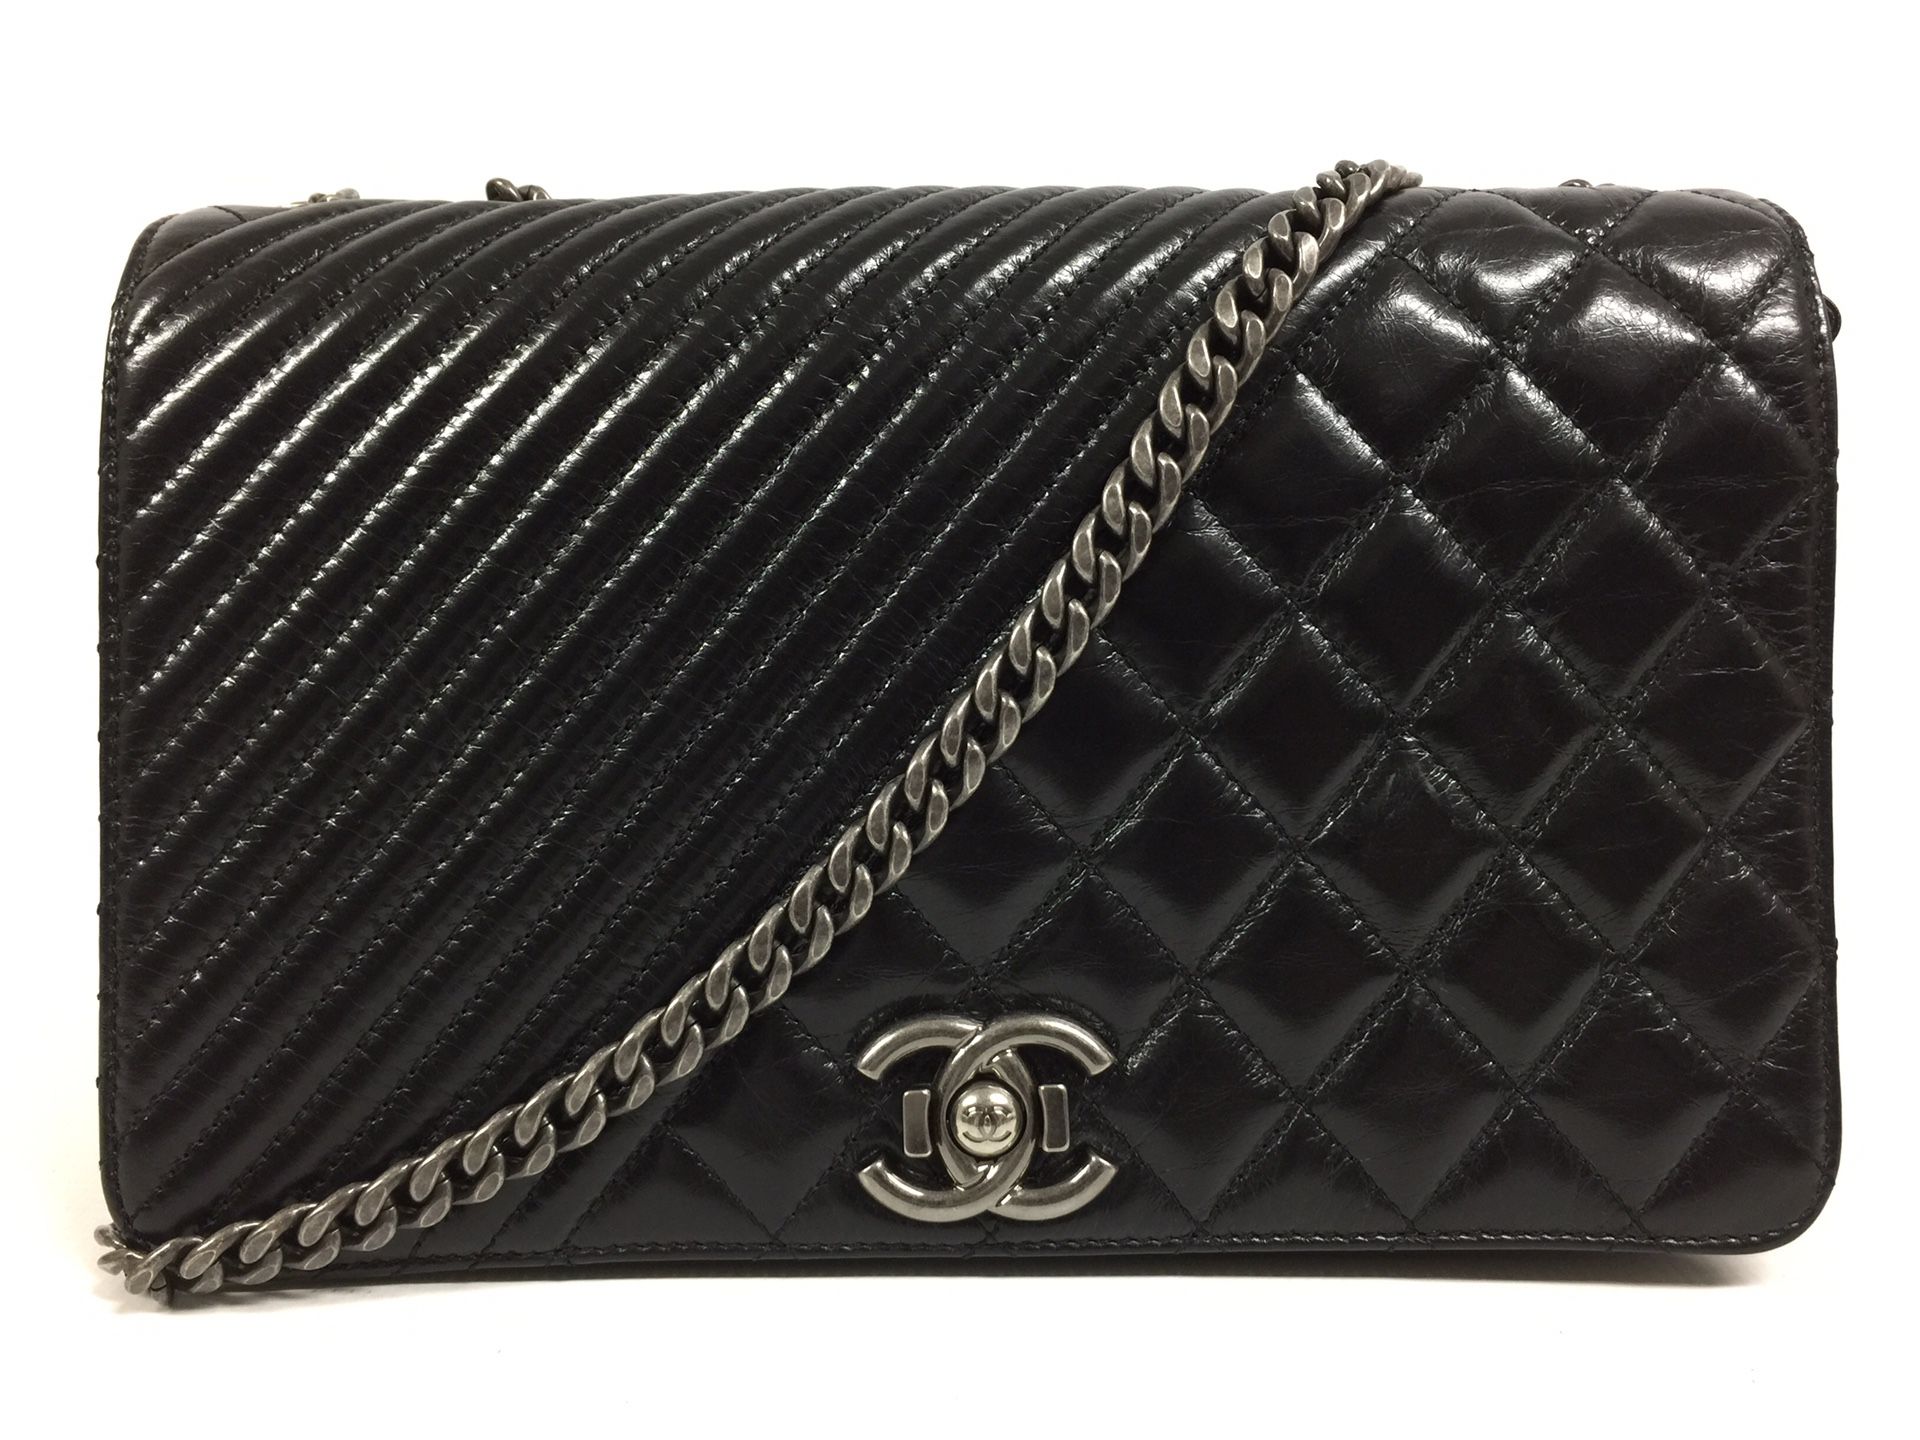 Chanel Coco Boy Classic Medium Flap Quilted Glazed Calfskin Leather Shoulder Bag